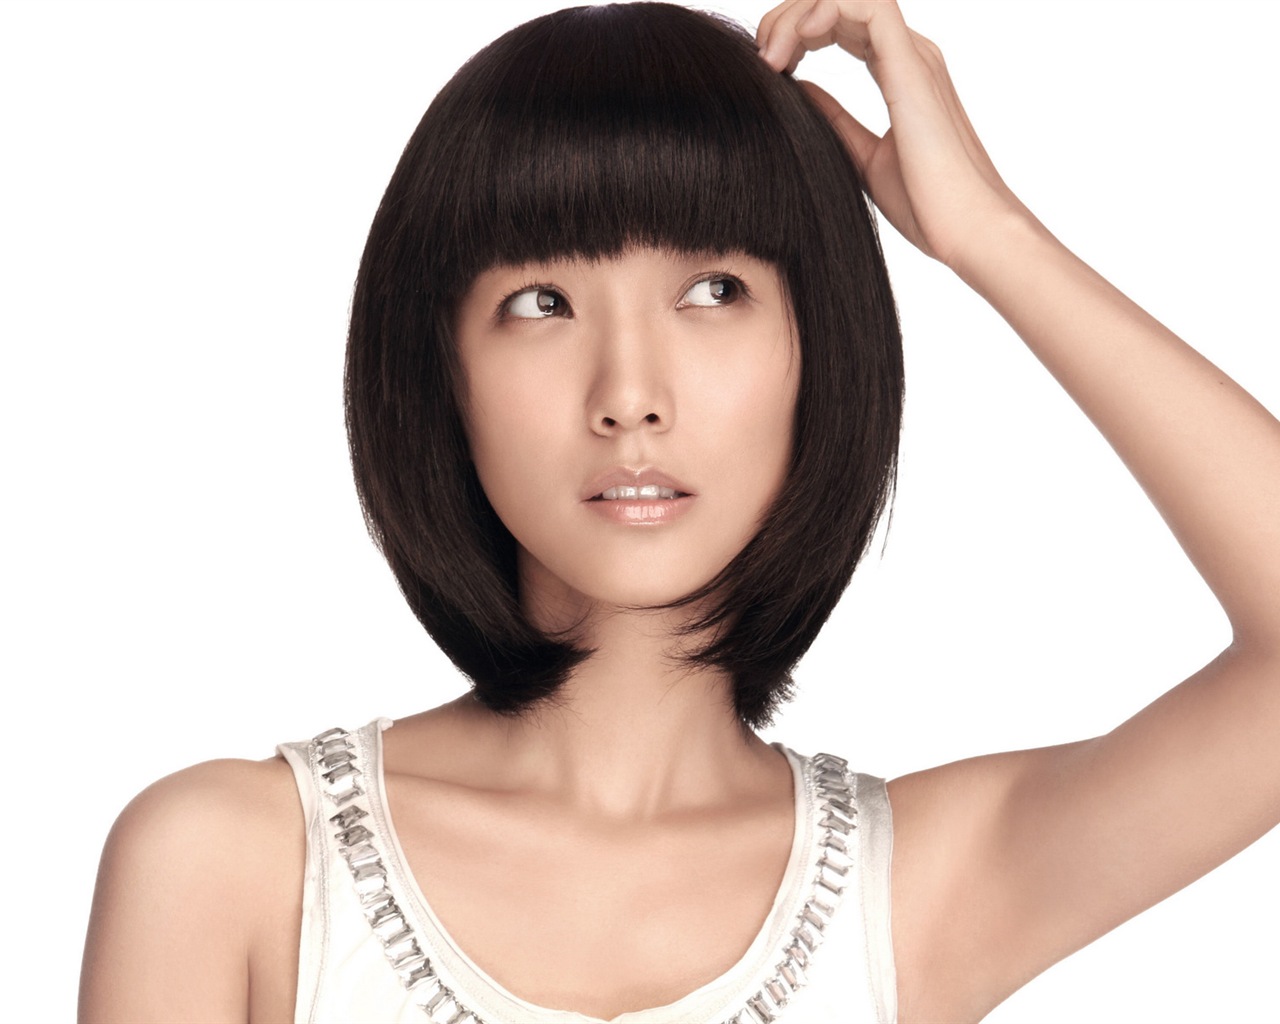 Short-haired girl HD wallpapers #14 - 1280x1024